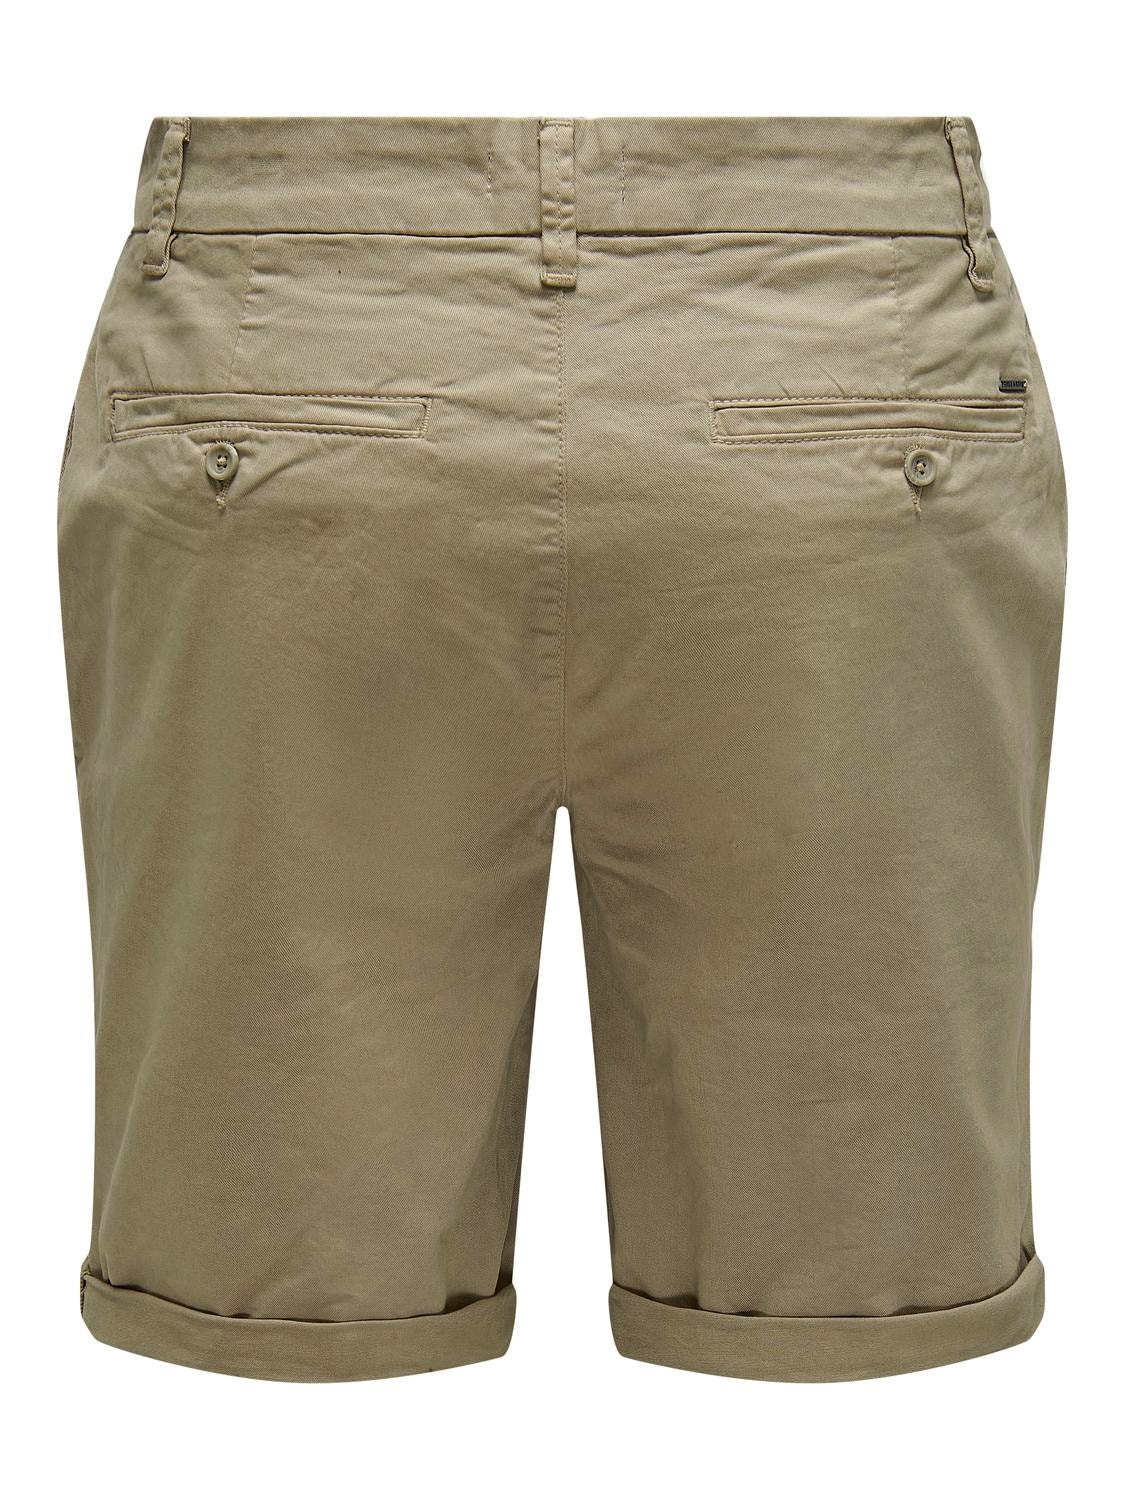 ONLY & SONS Normal passform Shorts -Chinchilla - 22024481